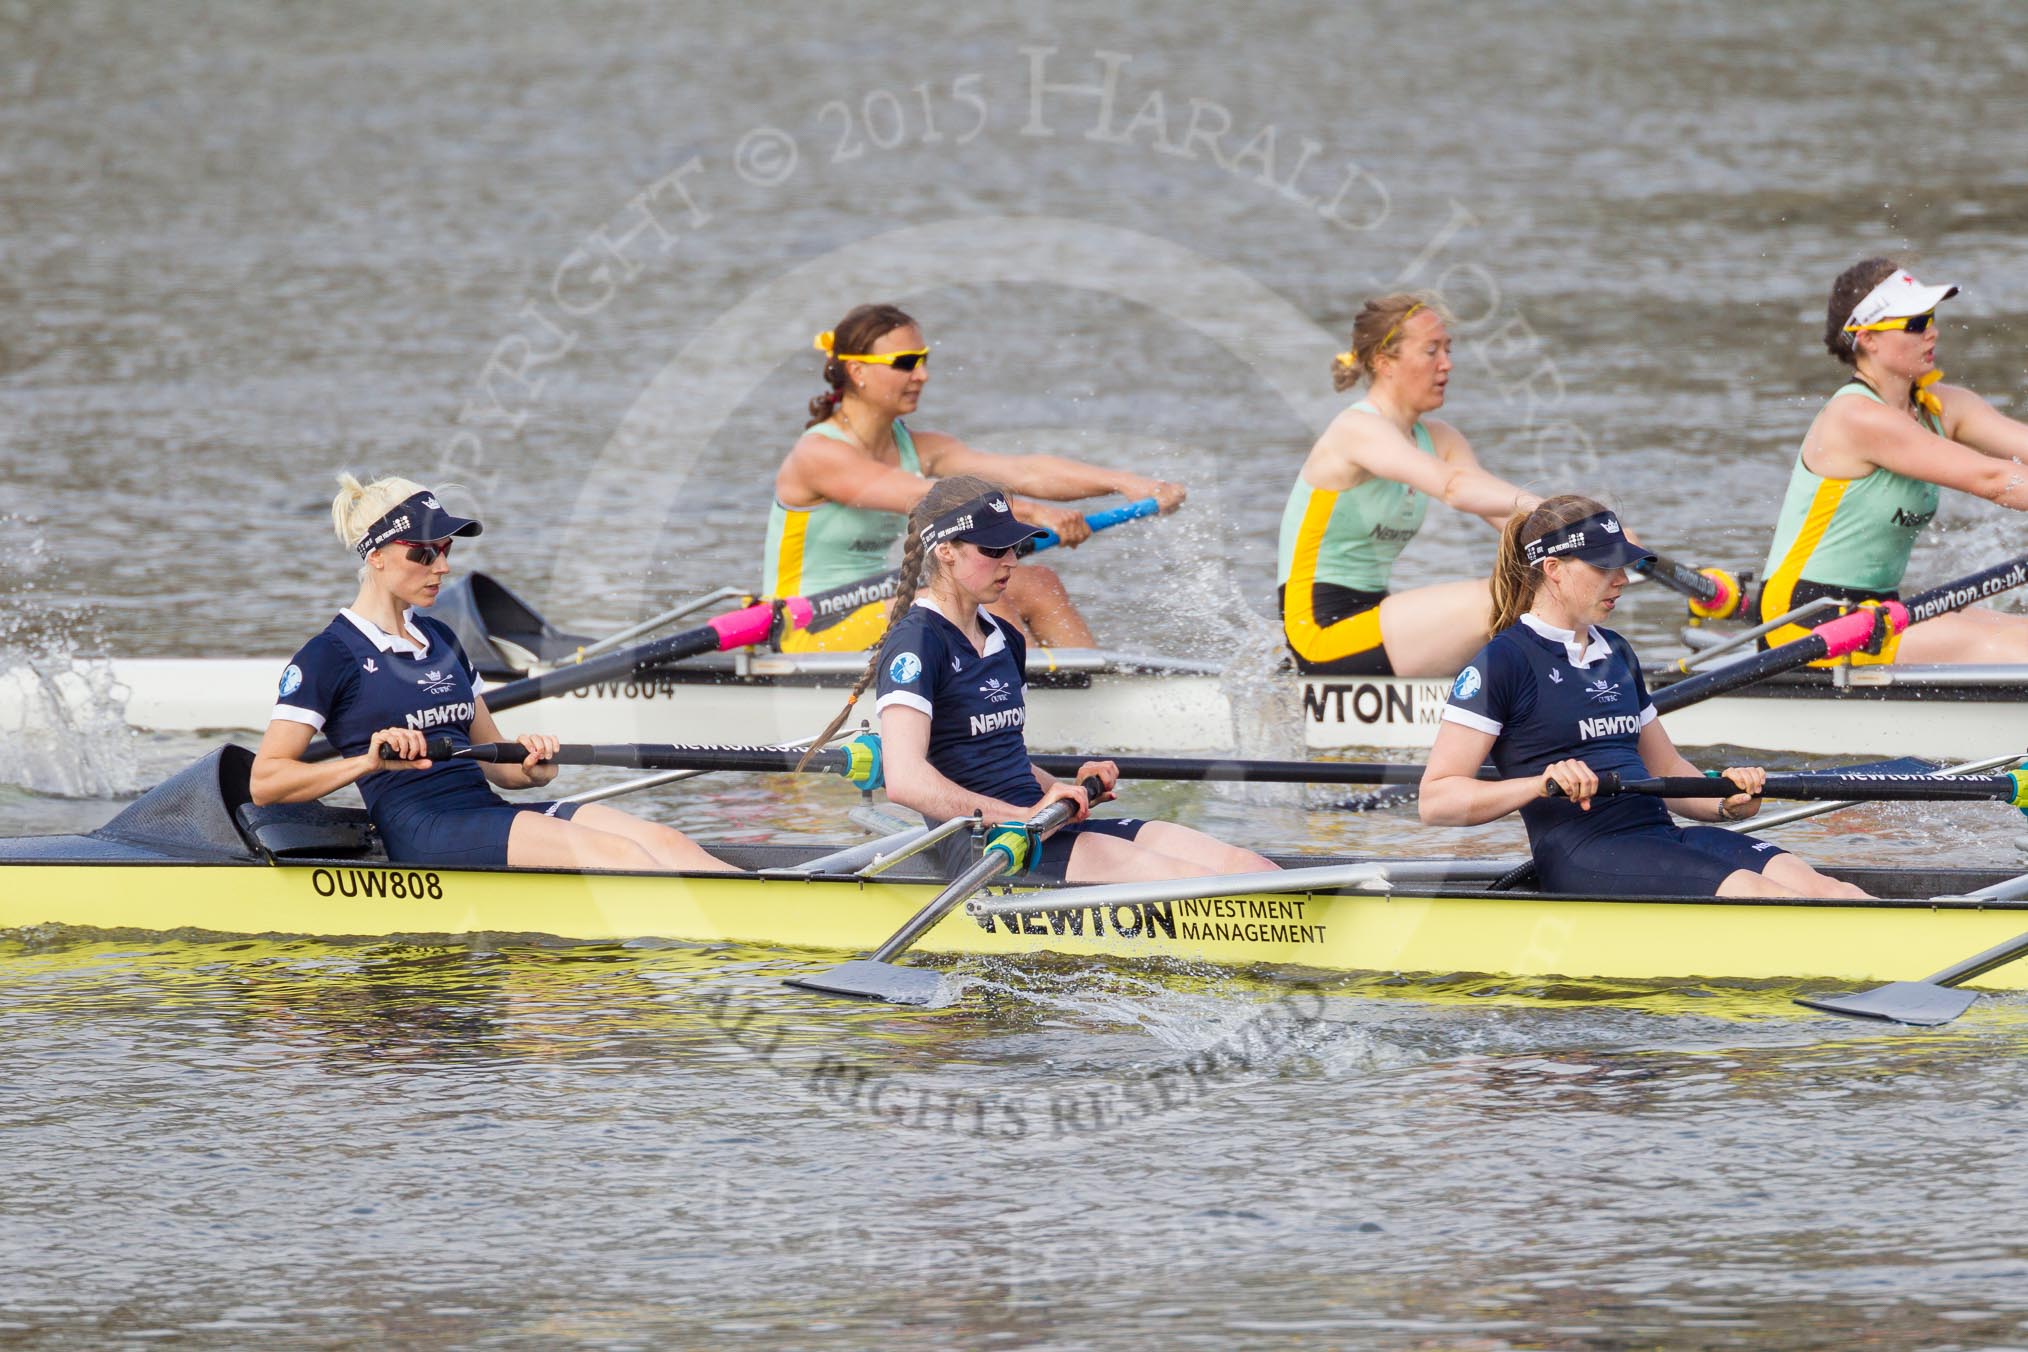 The Boat Race season 2015 - Newton Women's Boat Race.
River Thames between Putney and Mortlake,
London,

United Kingdom,
on 10 April 2015 at 16:03, image #121